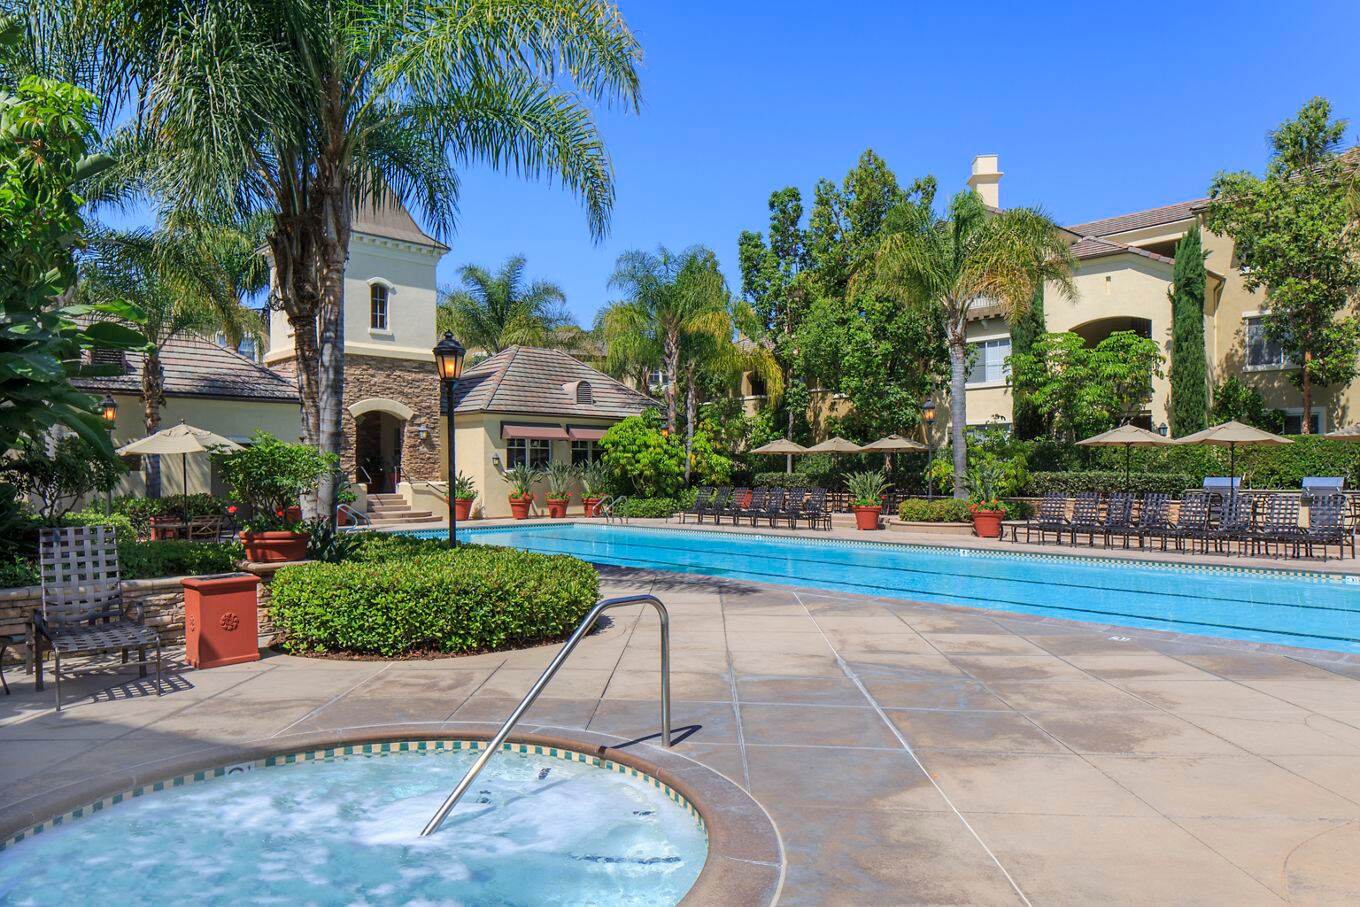 Pool and Spa view at Brittany Apartment Homes in Irvine, CA.